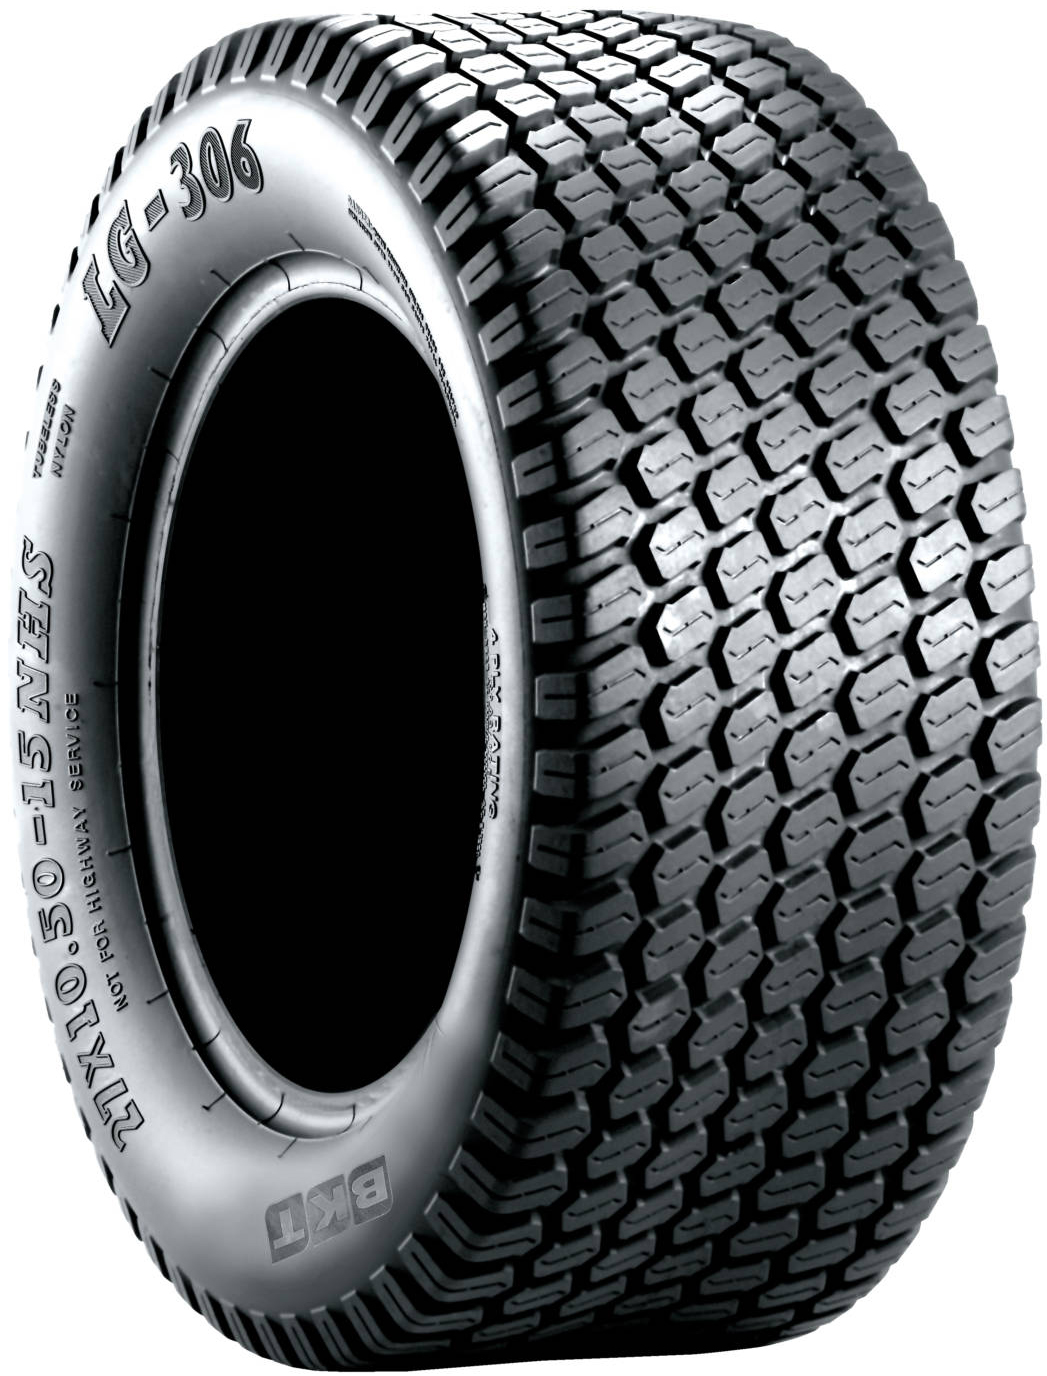 product_type-industrial_tires BKT LG-306 6 TL 8.5 R14